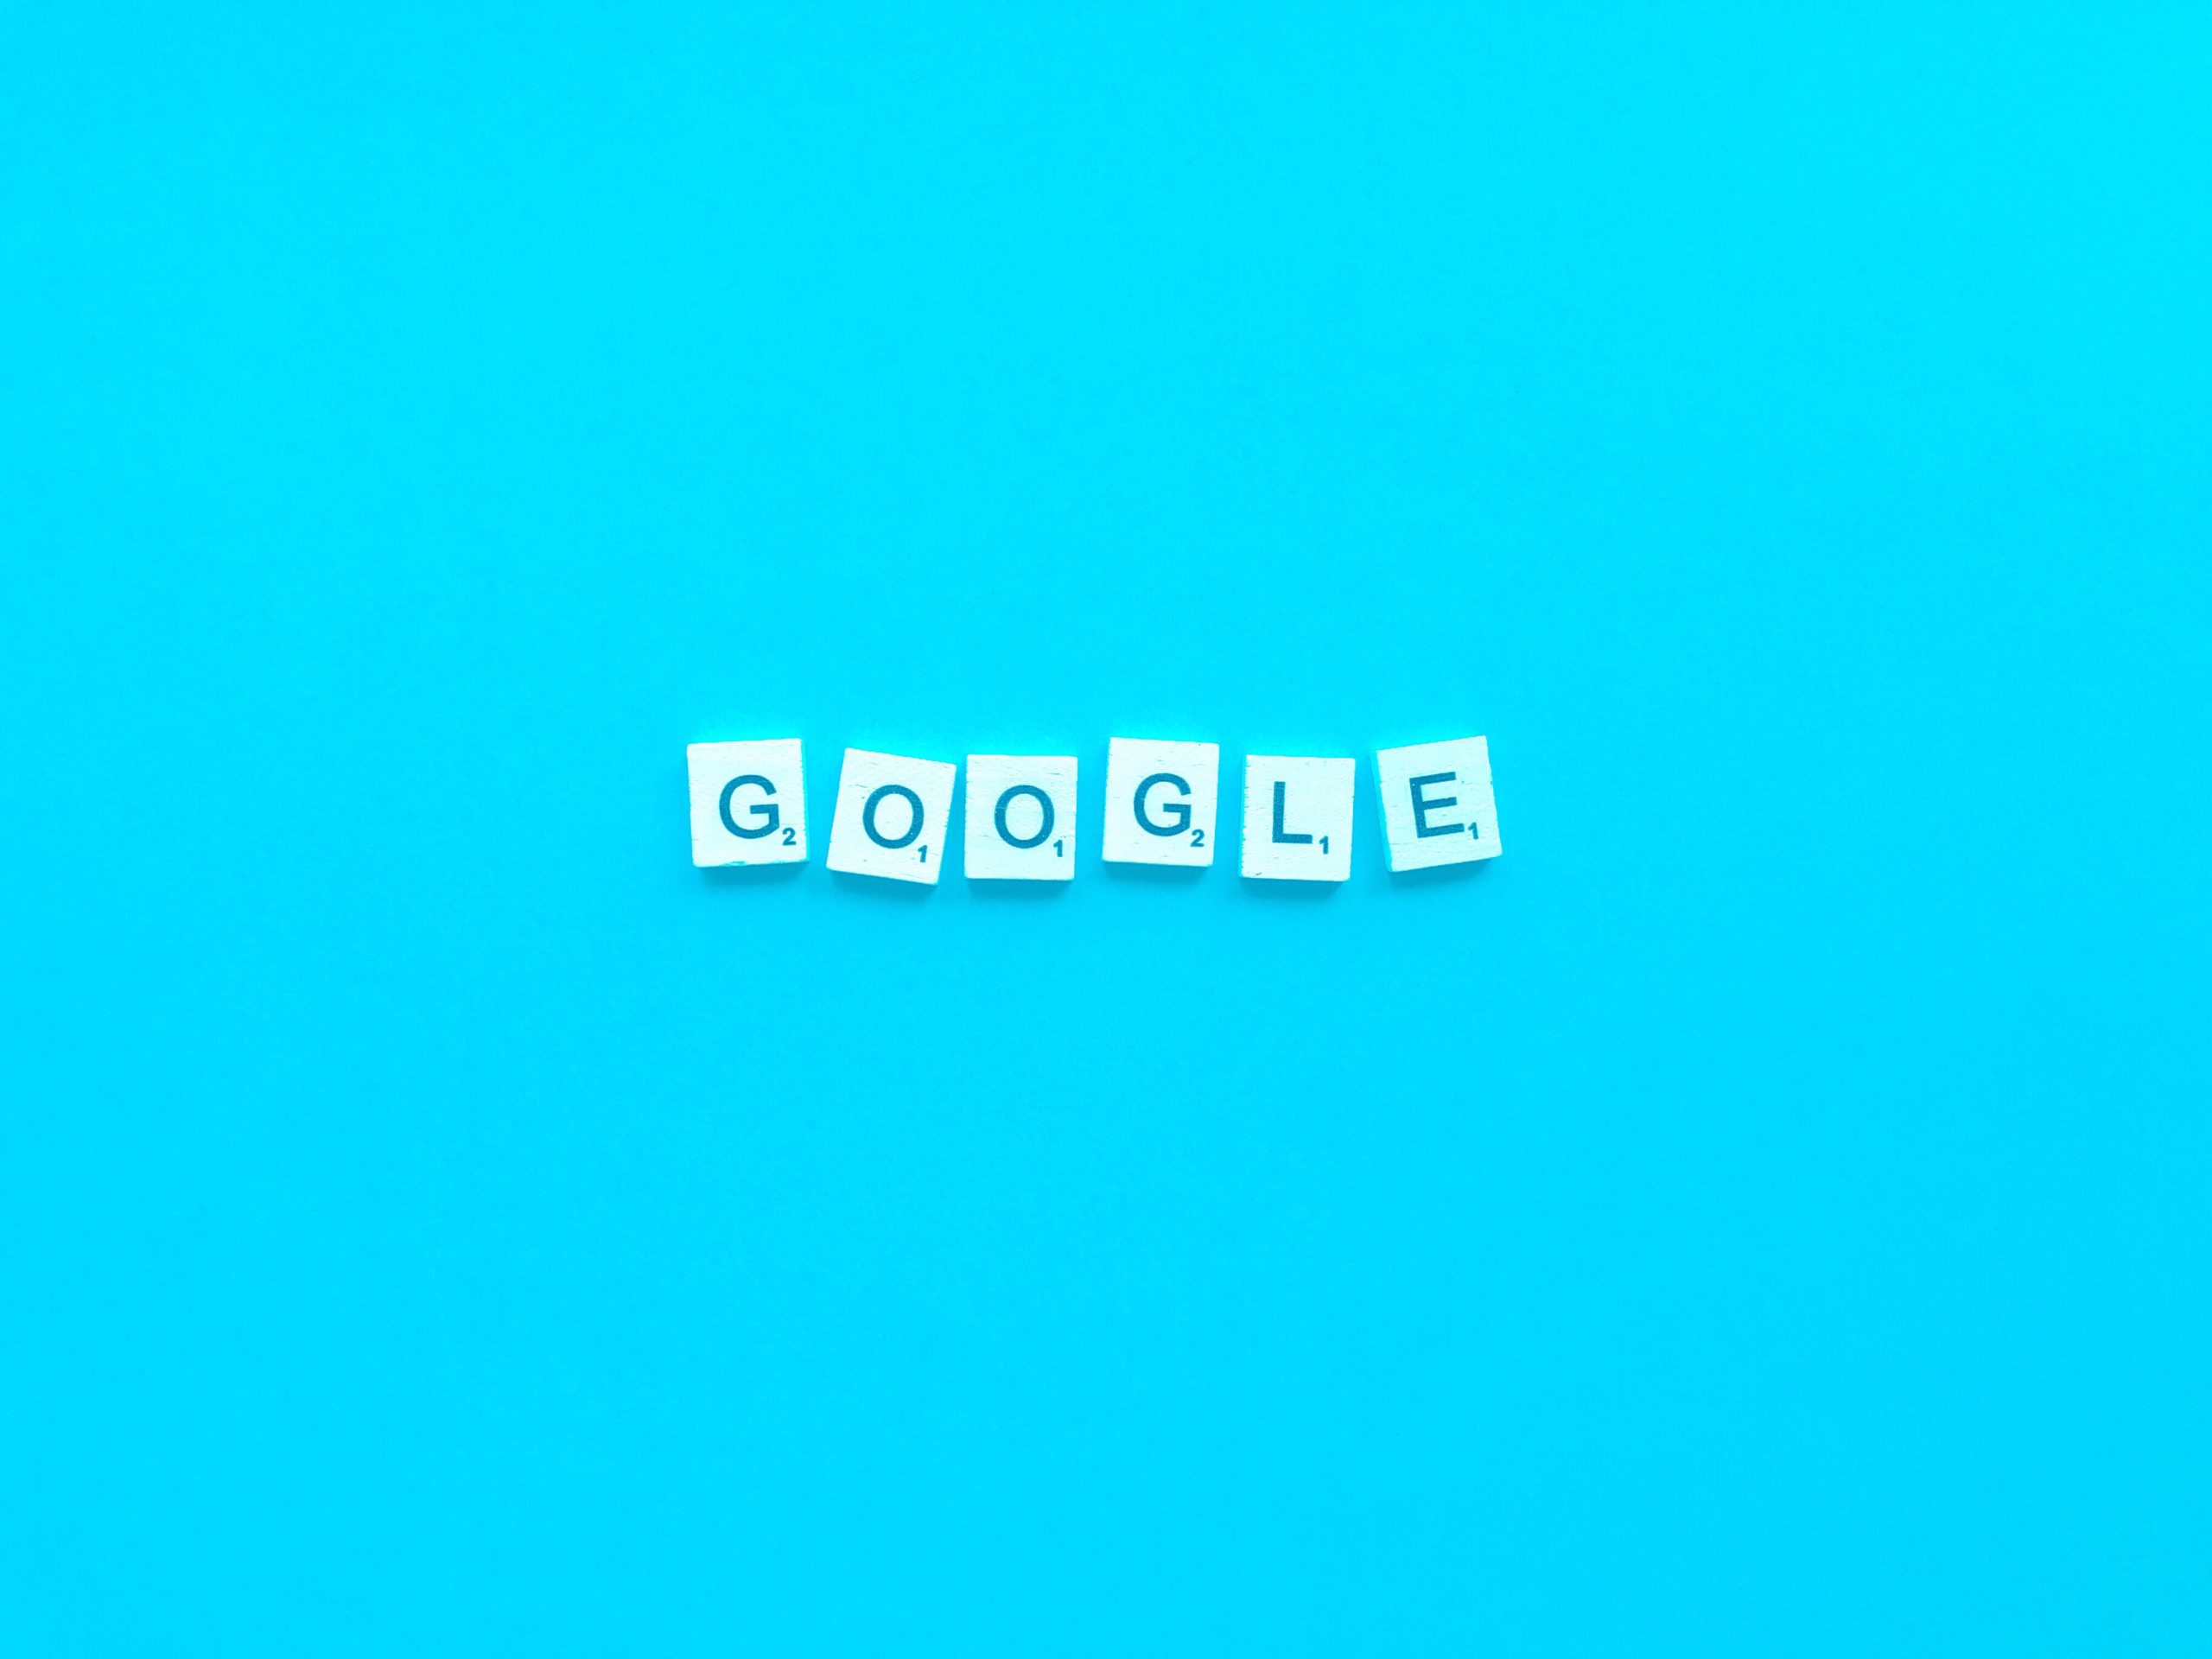 tiles spelling out google